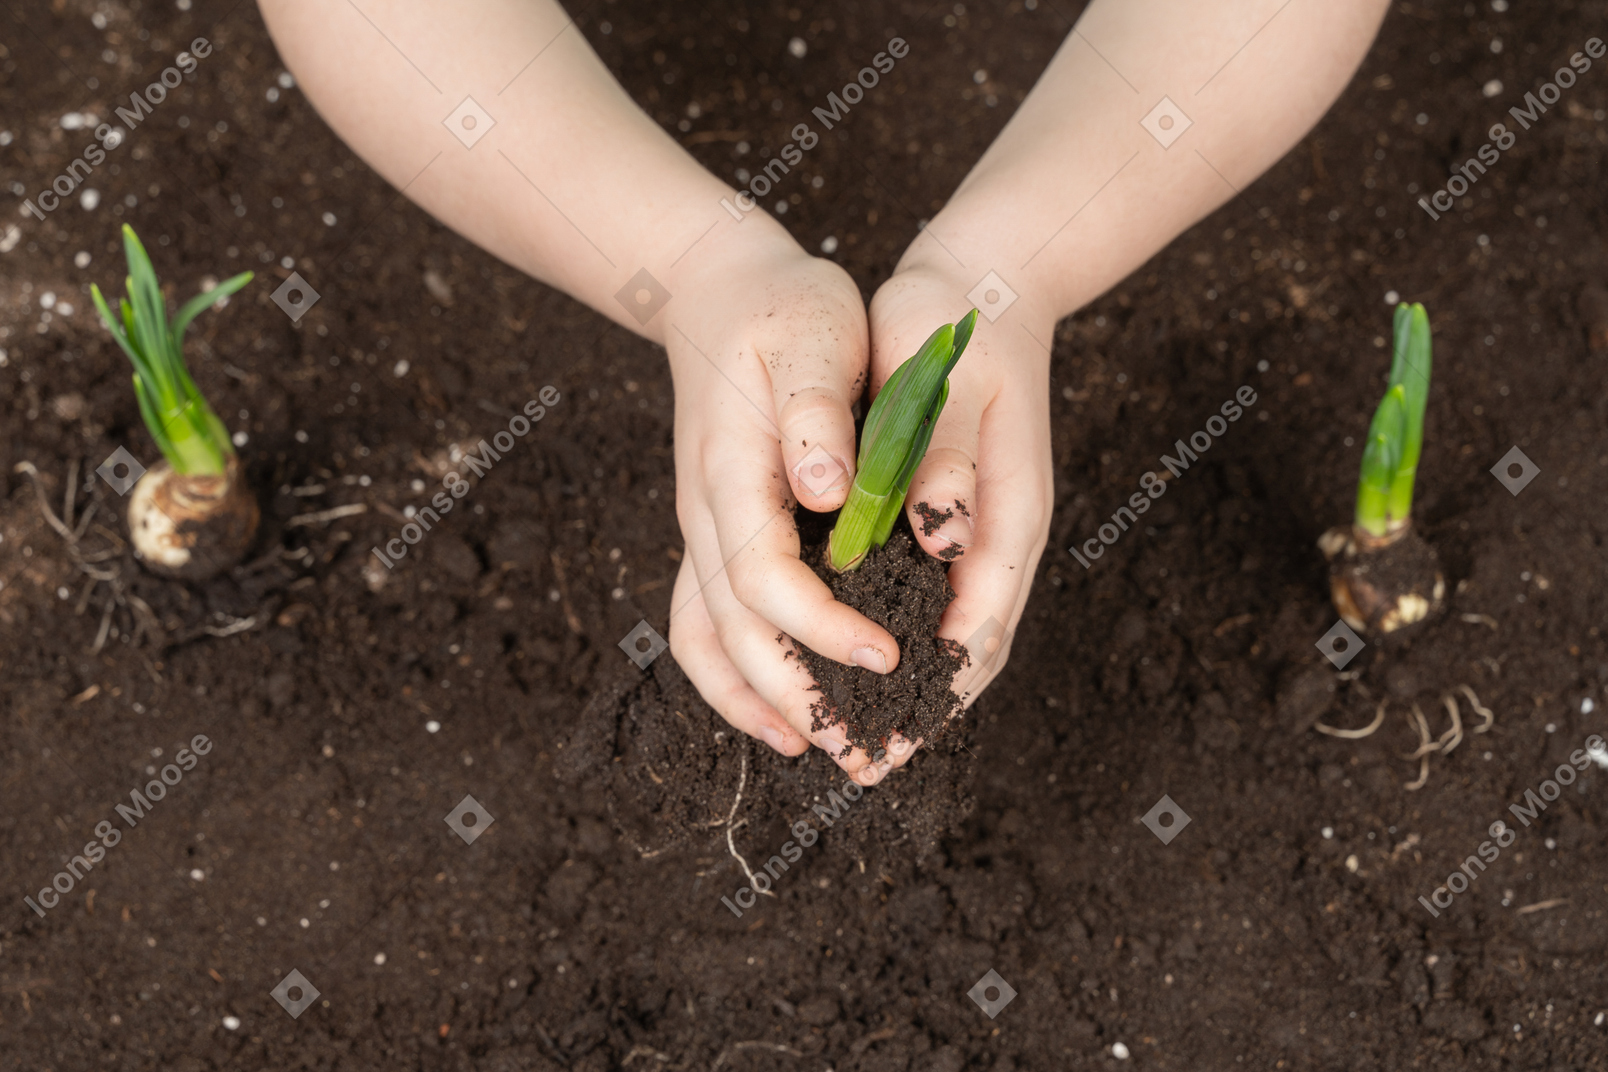 Human hands holding a little plant